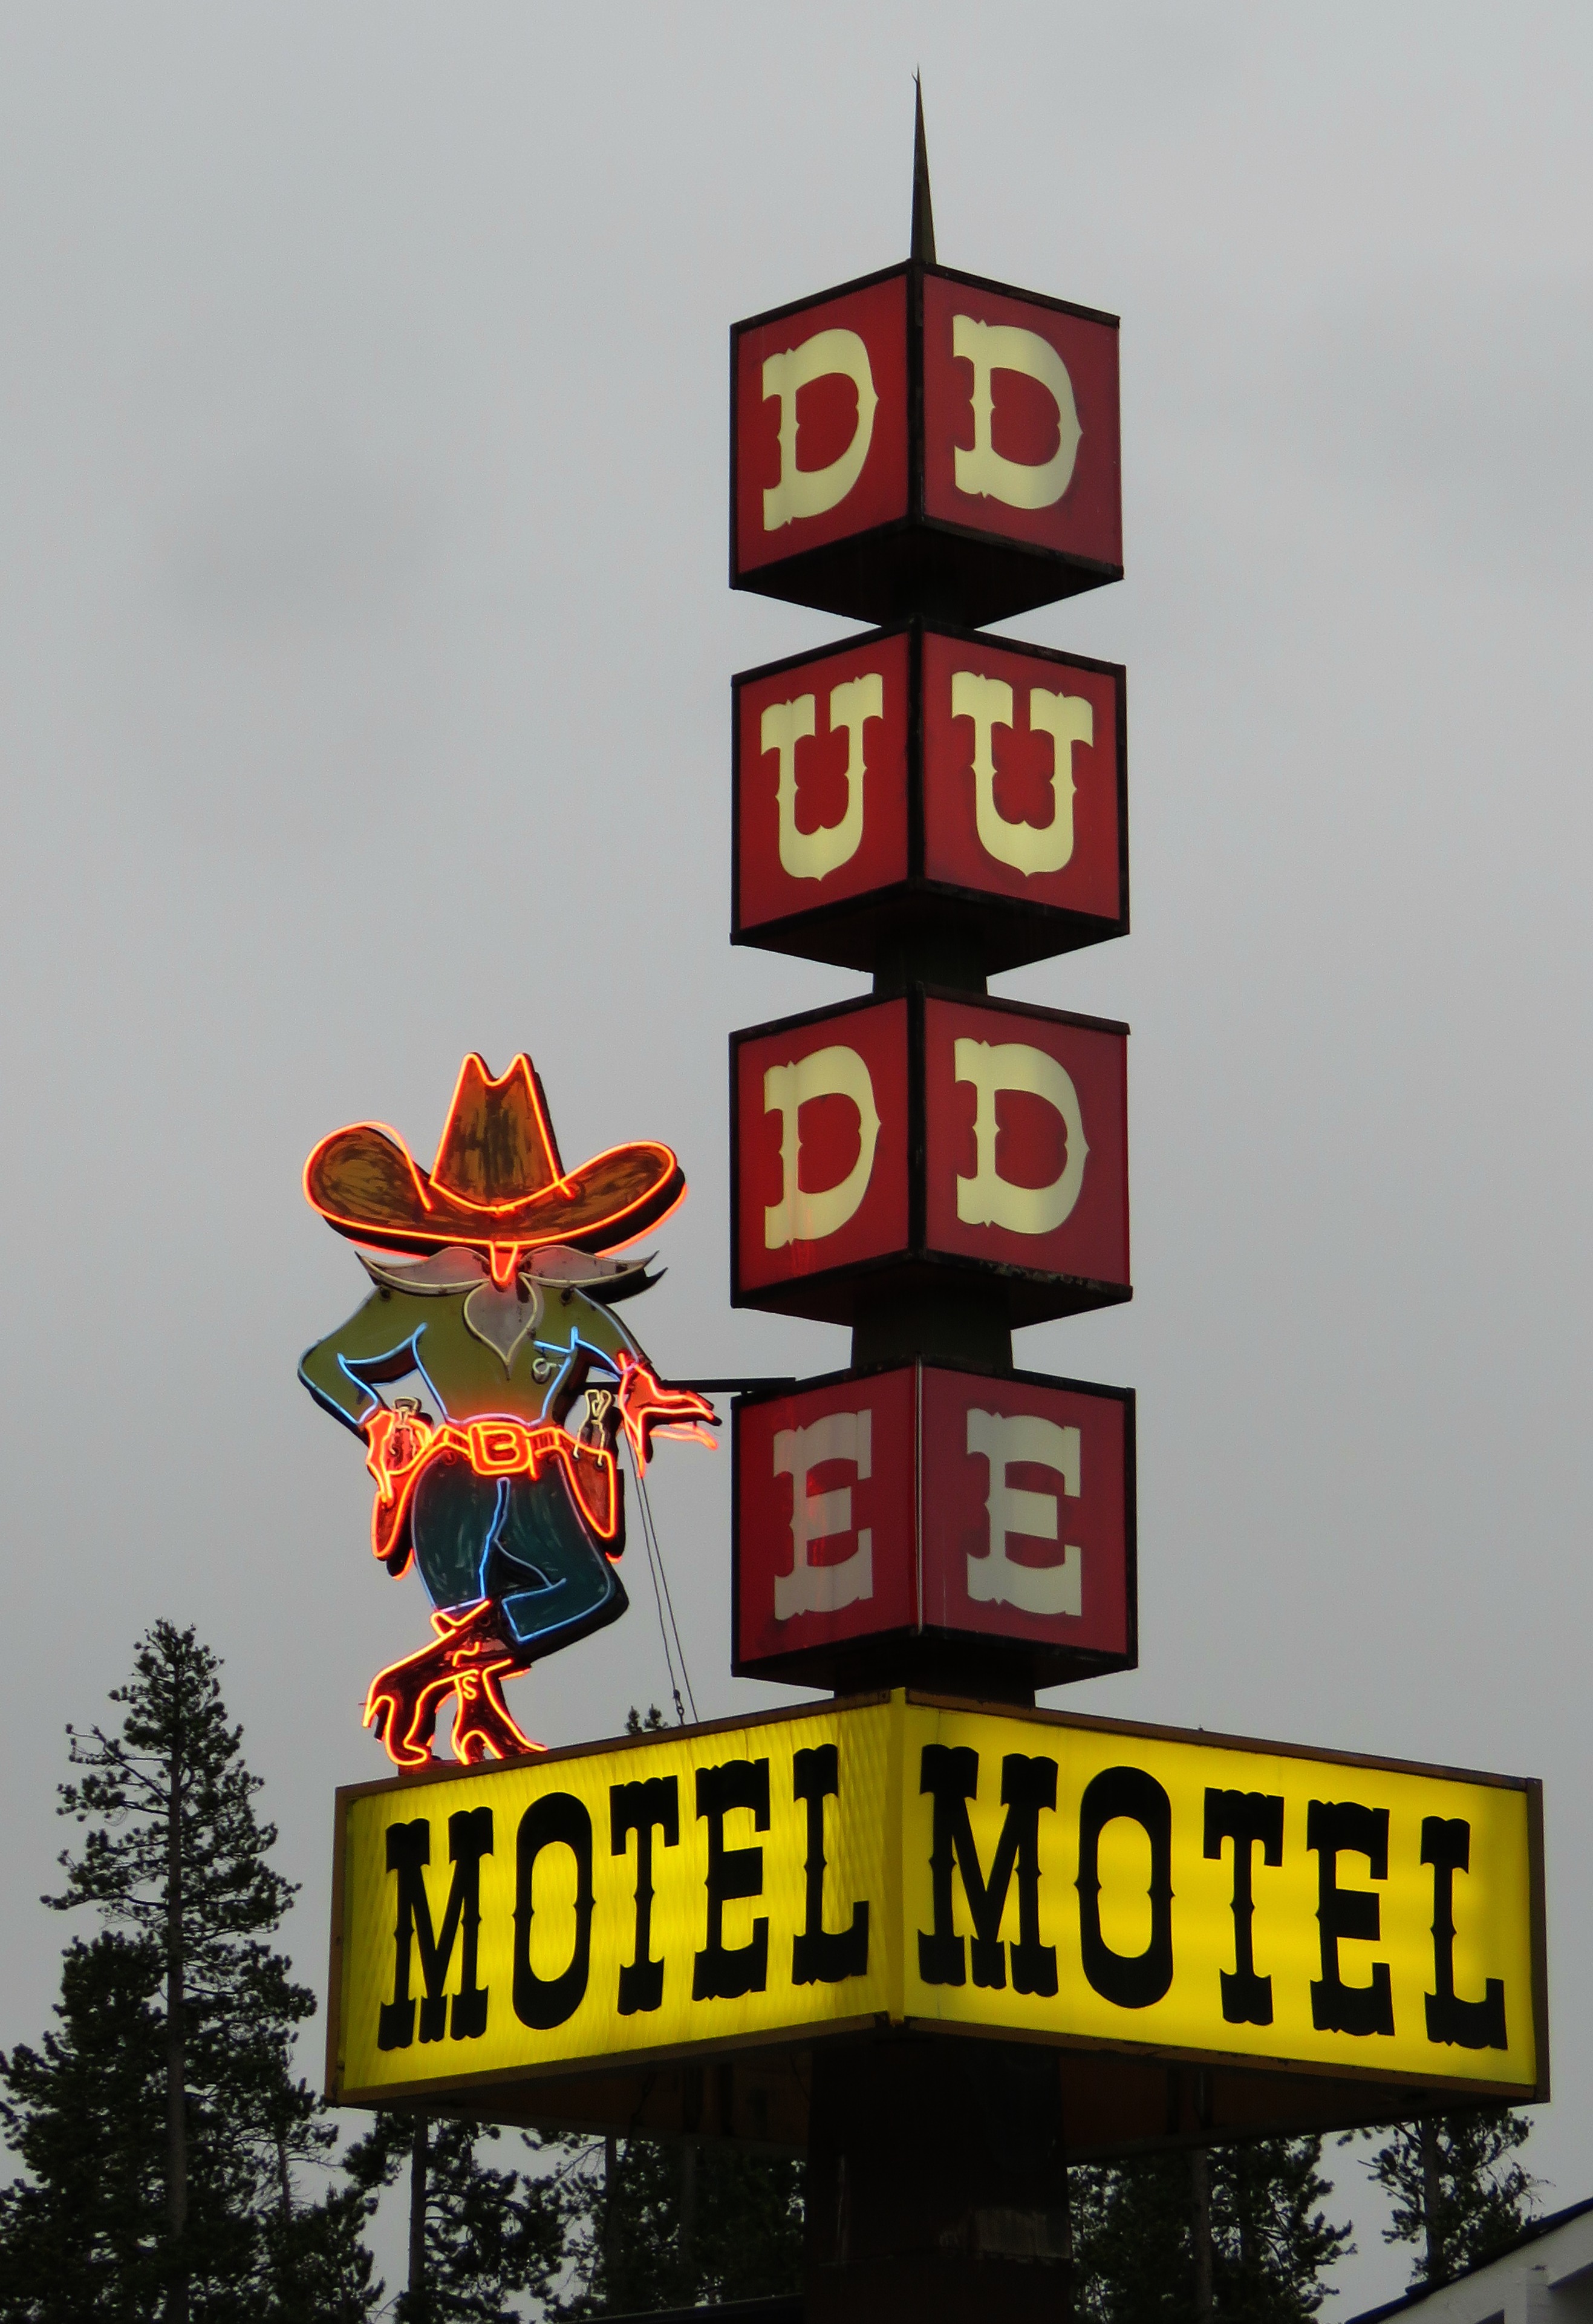 The Dude Motel - 3 Madison Ave, West Yellowstone, Montana U.S.A. - June 15, 2016